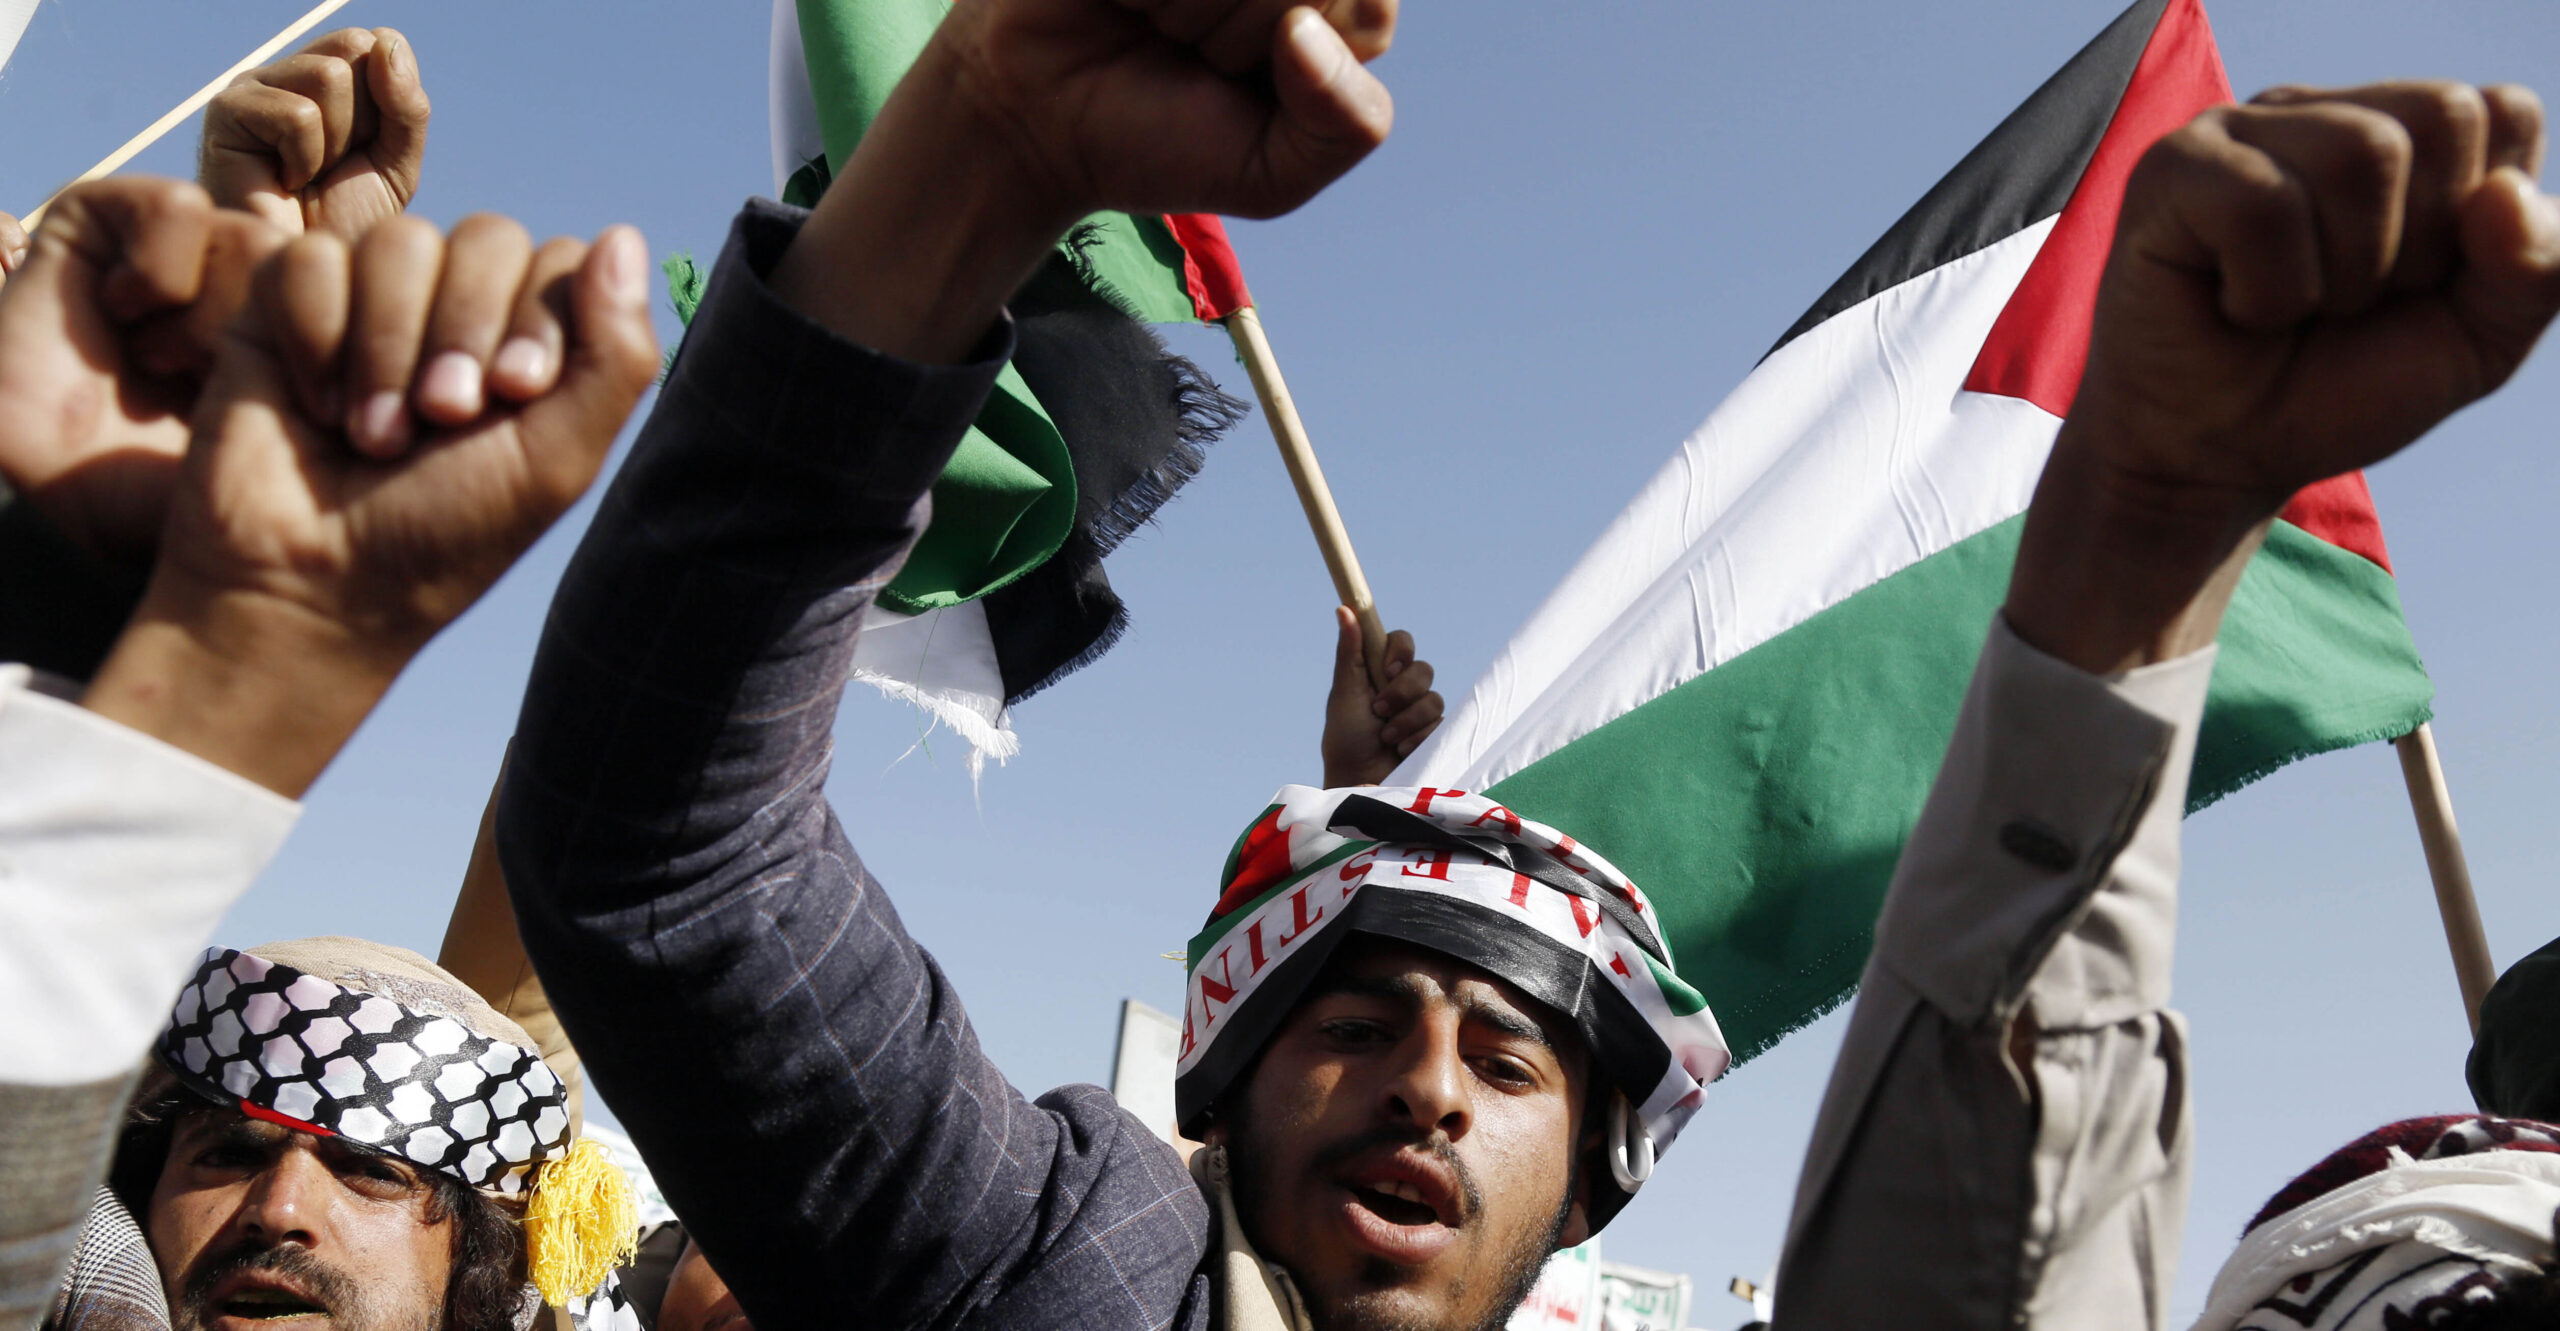 The Far Left's Inexplicable Defense of Hamas' Bloodlust